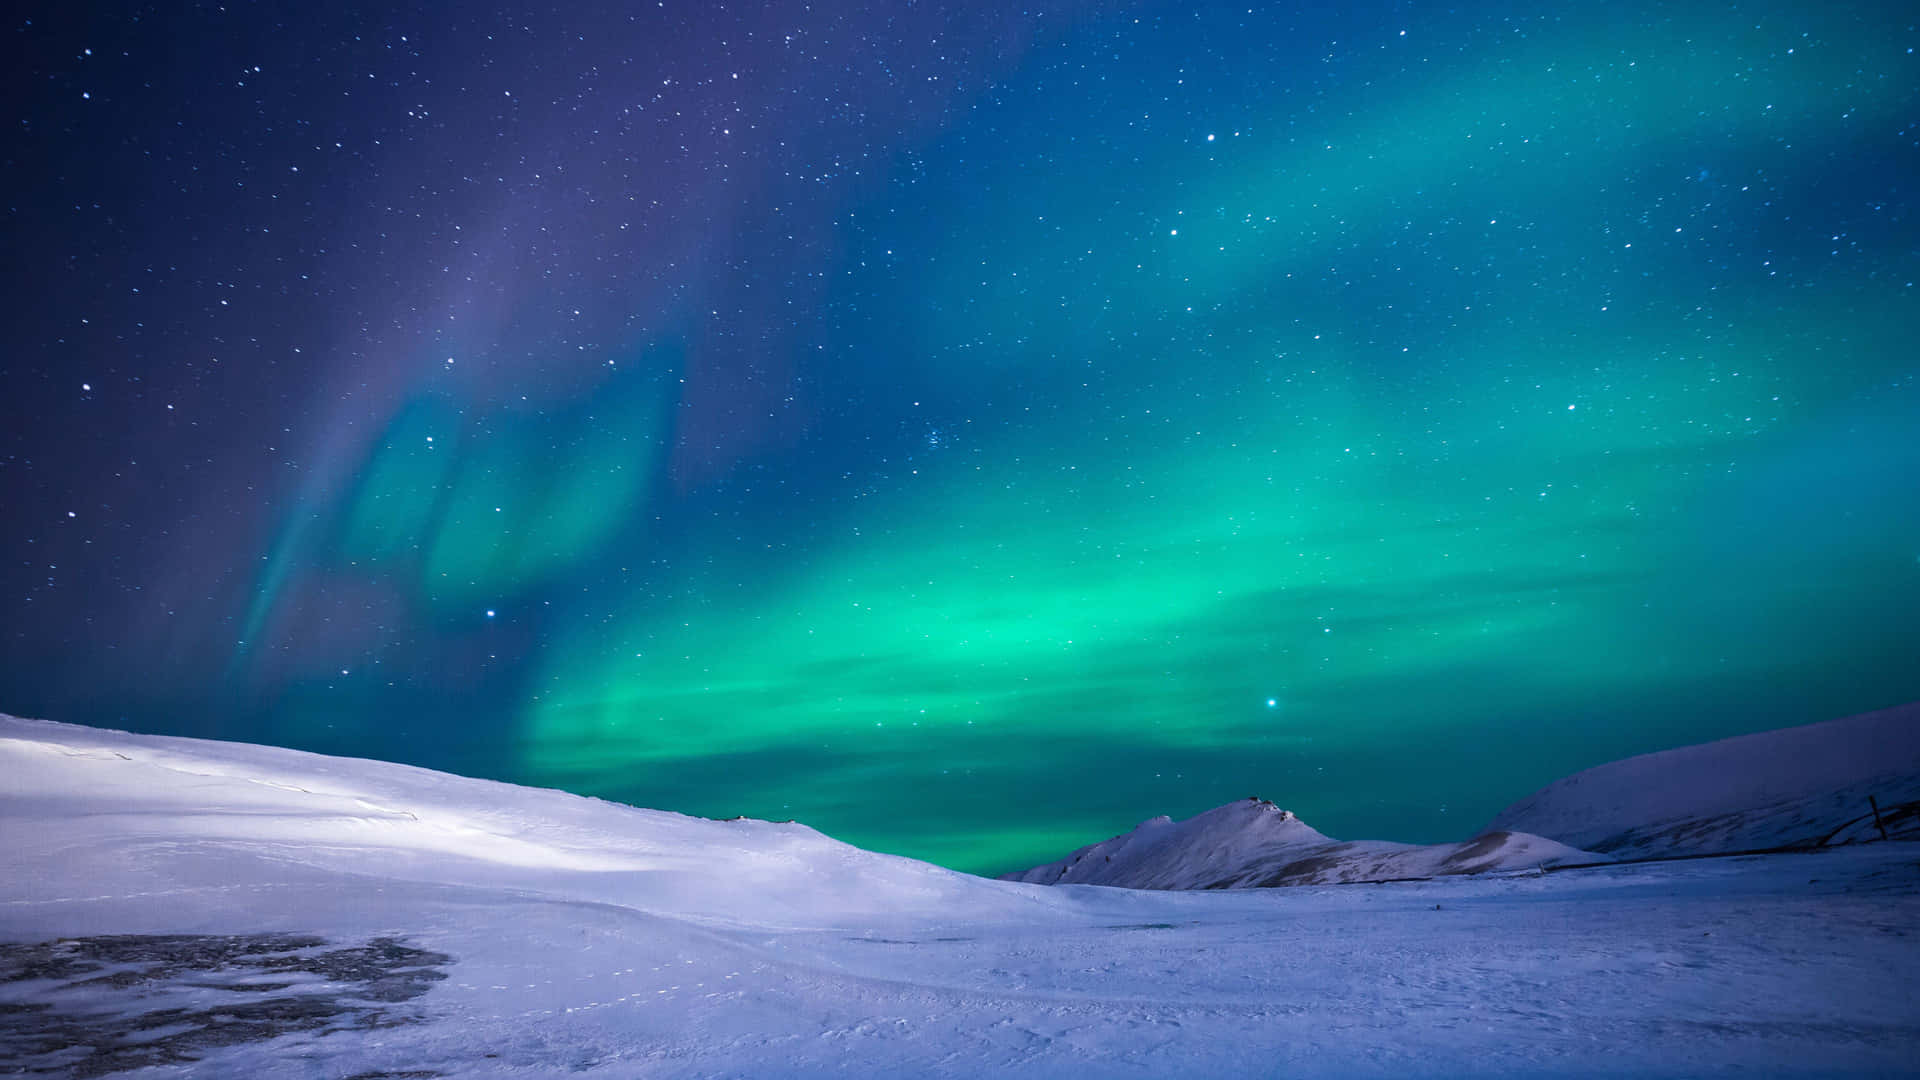 Aurora Borealis lights up the night sky in Northern Lapland.